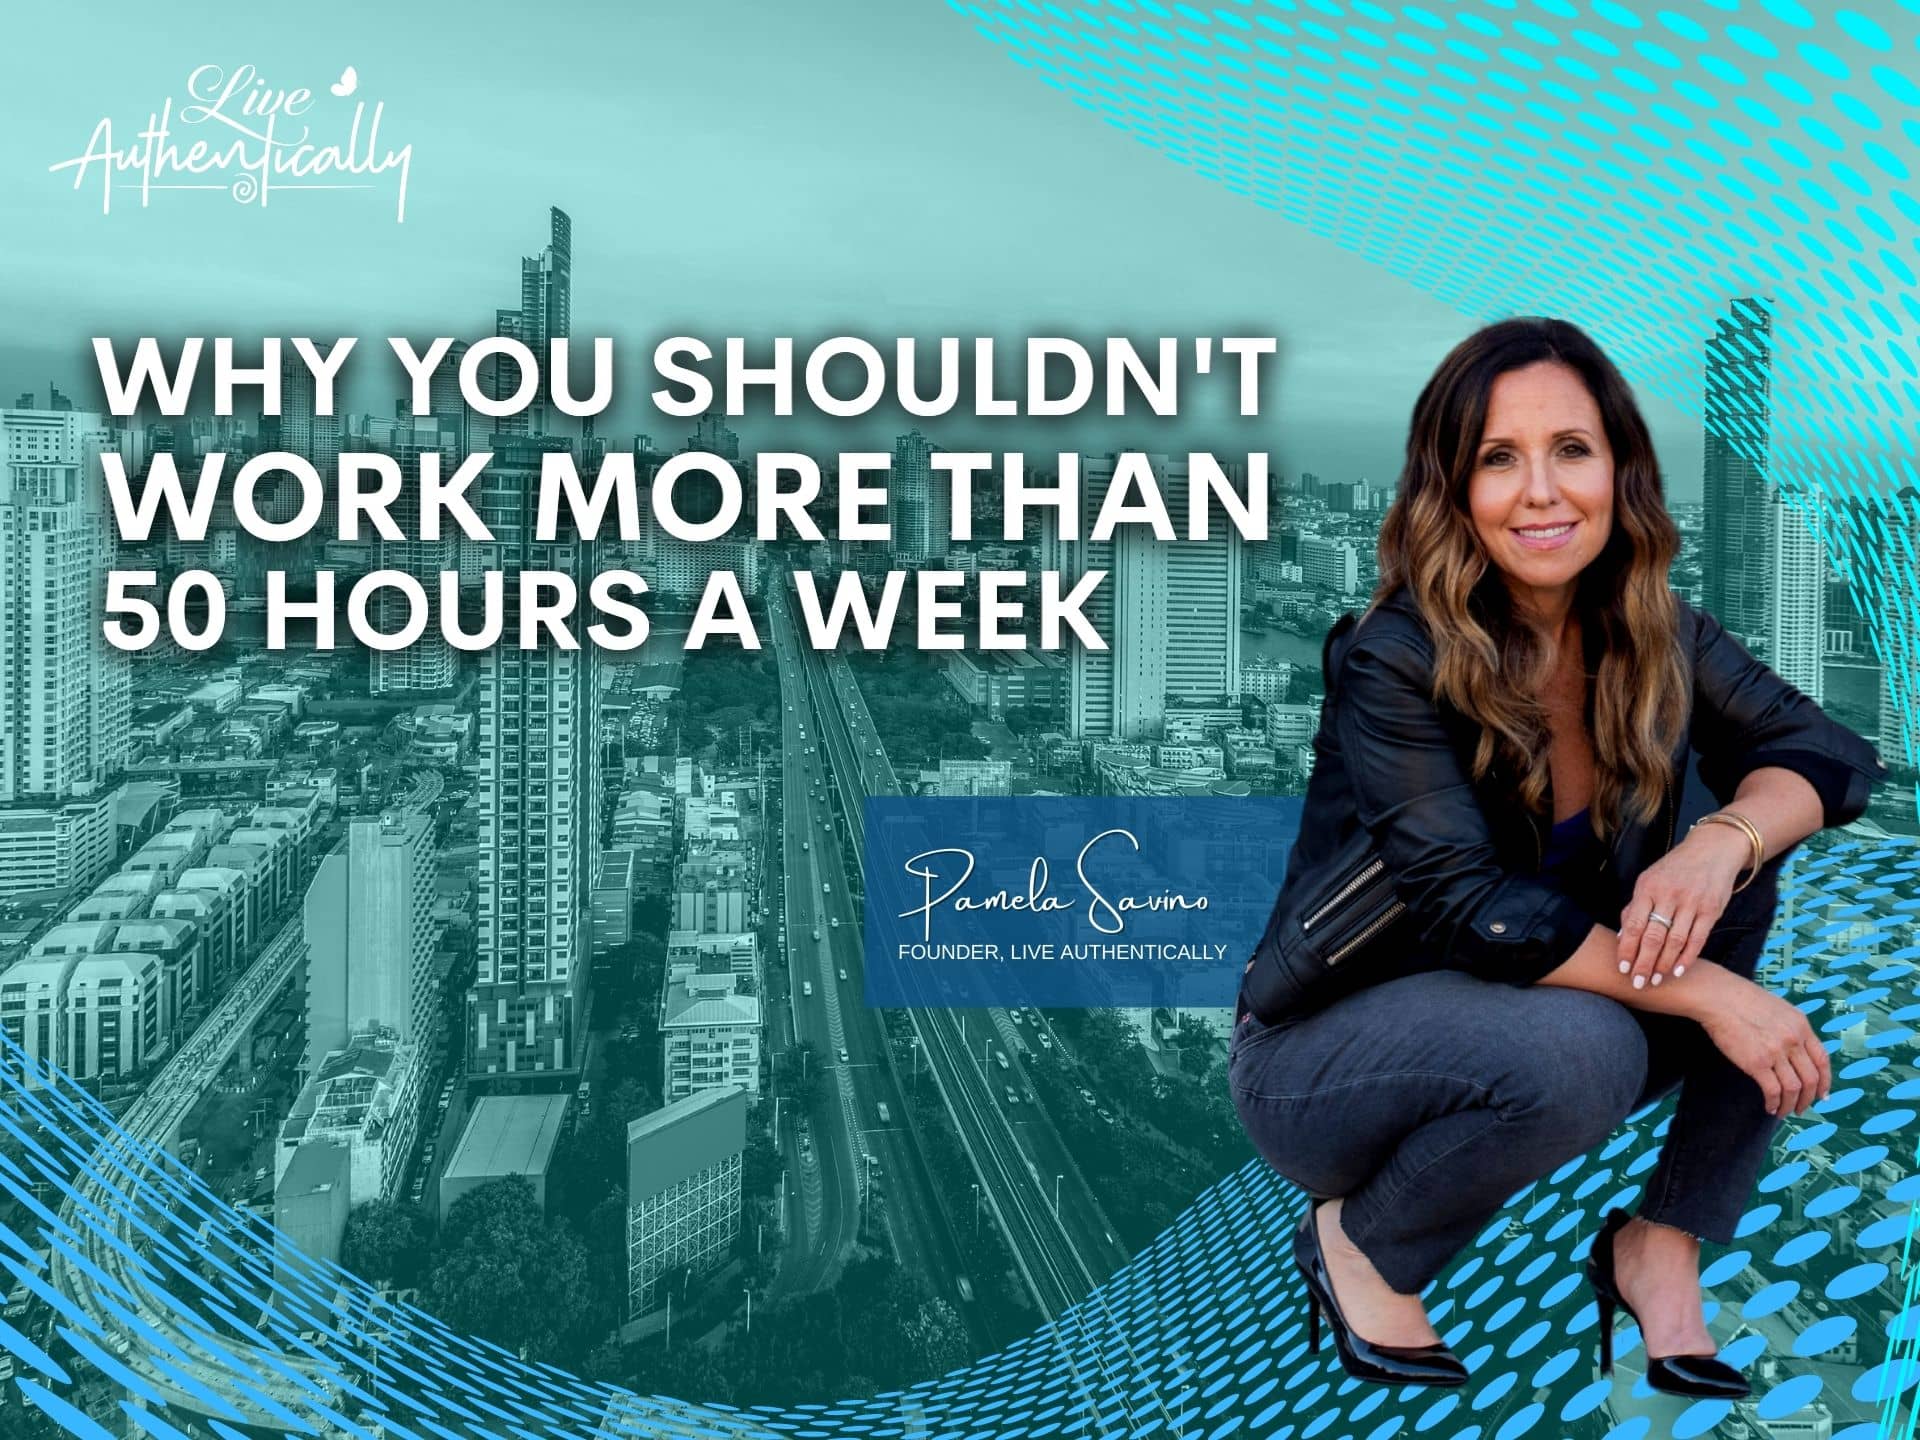 Why You Shouldn't Work More Than 50 Hours a Week